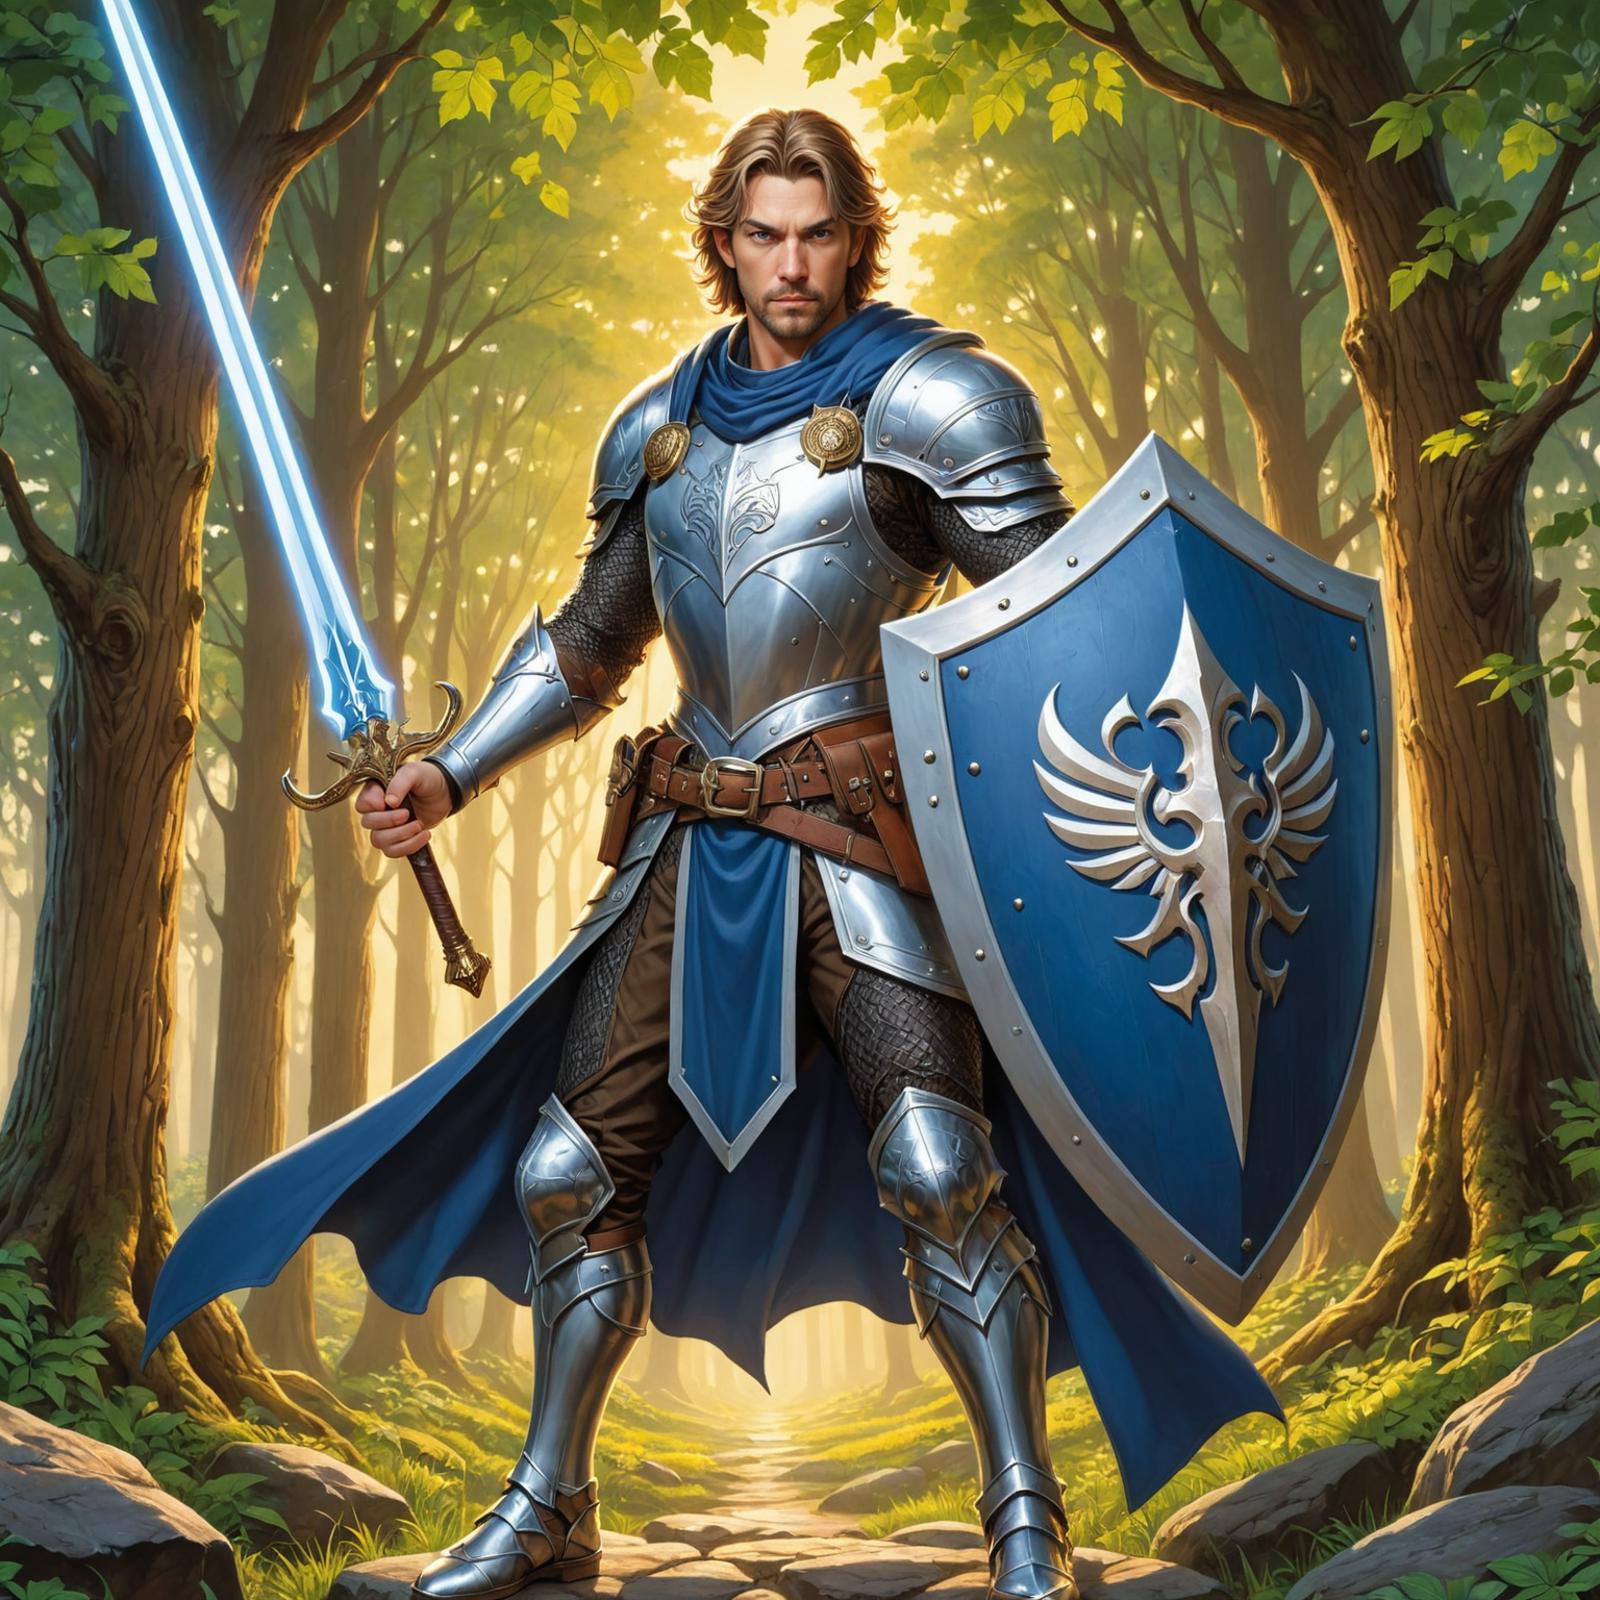 A man in a blue and silver suit of armor holding a sword.